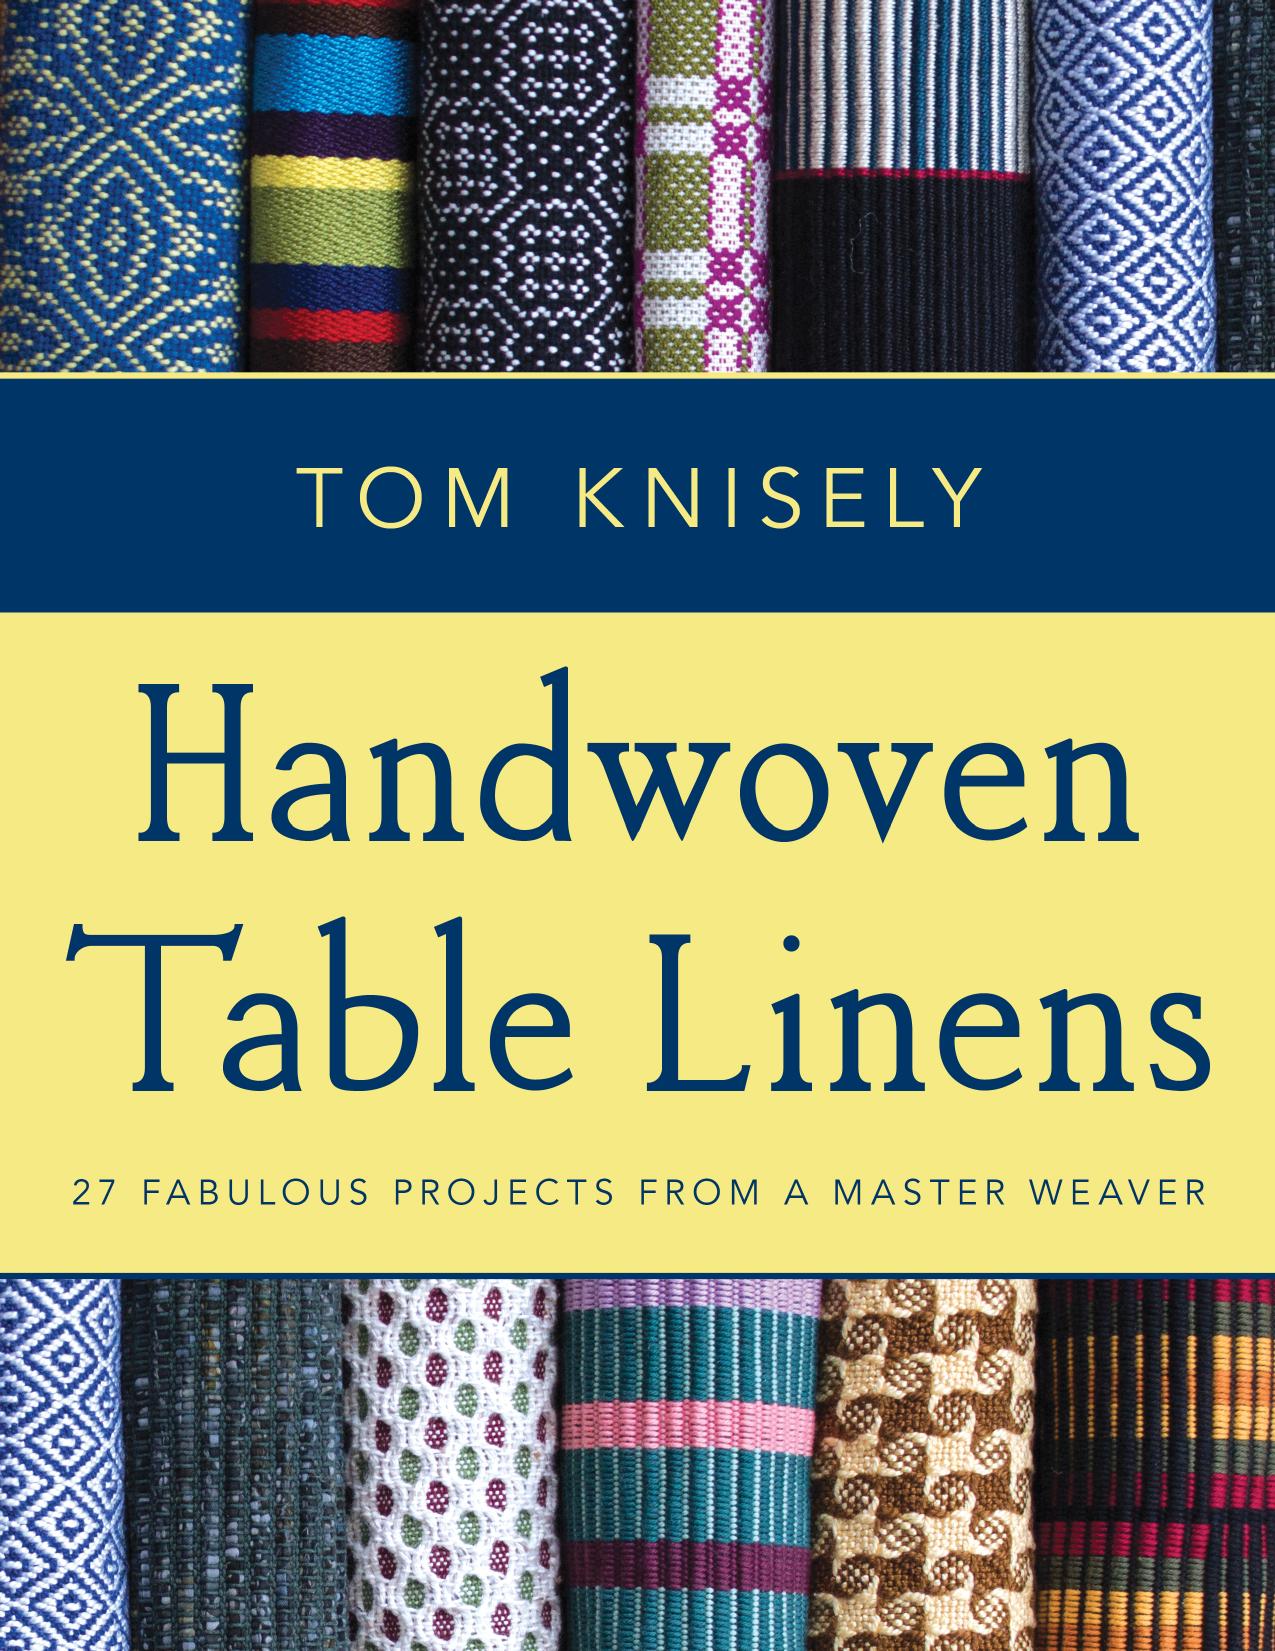 Handwoven Table Linens - interior.indd